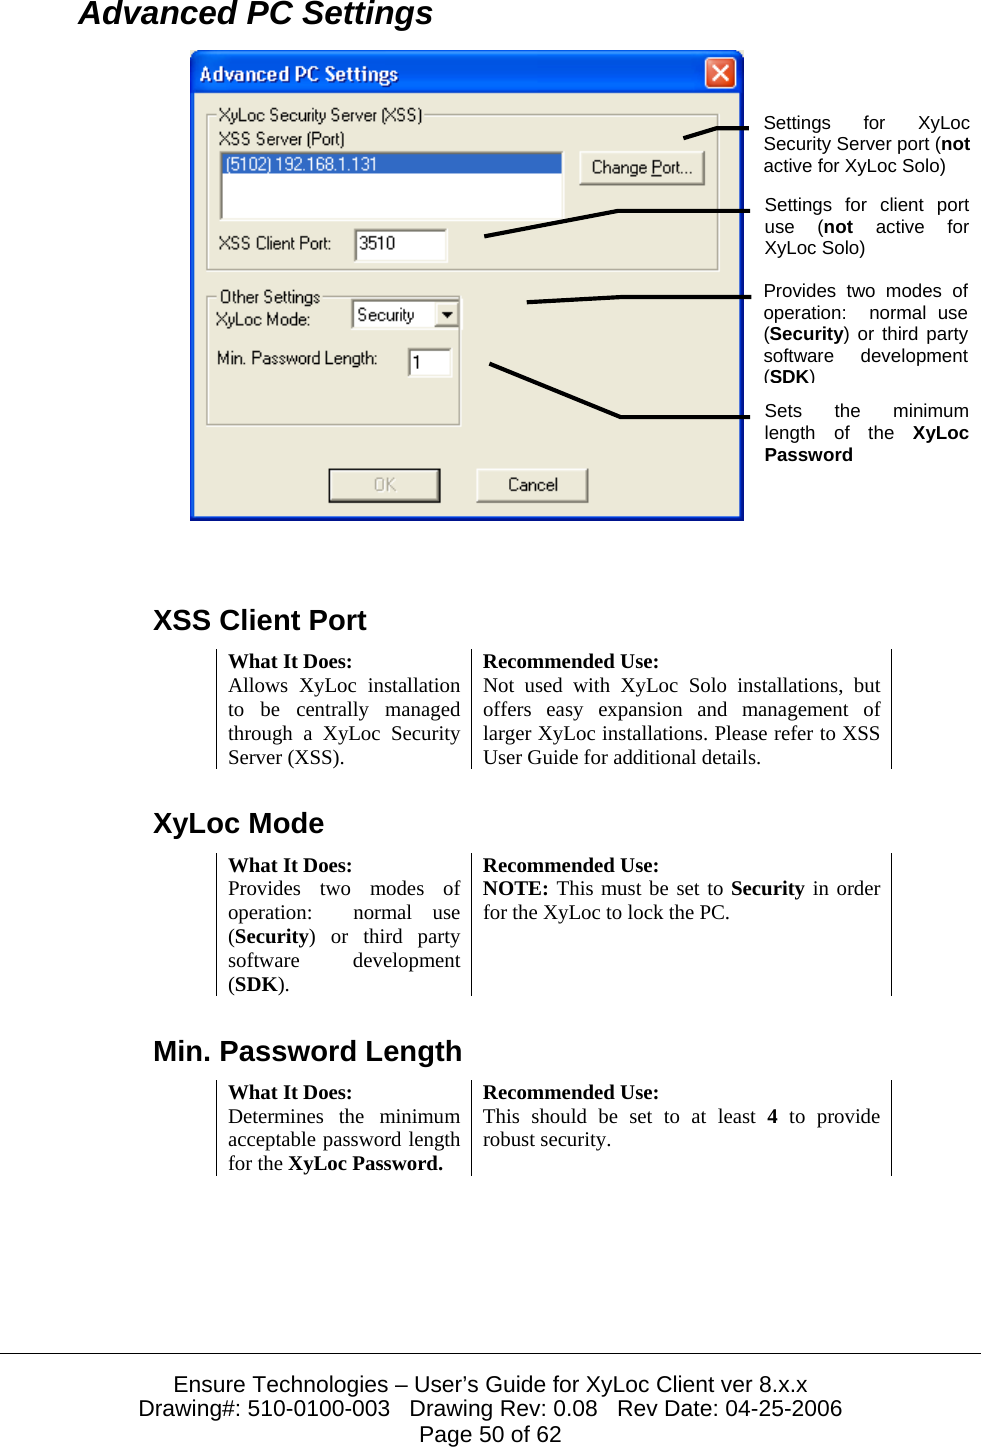  Ensure Technologies – User’s Guide for XyLoc Client ver 8.x.x Drawing#: 510-0100-003   Drawing Rev: 0.08   Rev Date: 04-25-2006 Page 50 of 62 Advanced PC Settings   XSS Client Port What It Does:  Recommended Use: Allows XyLoc installation to be centrally managed through a XyLoc Security Server (XSS). Not used with XyLoc Solo installations, but offers easy expansion and management of larger XyLoc installations. Please refer to XSS User Guide for additional details. XyLoc Mode What It Does:  Recommended Use: Provides two modes of operation:  normal use (Security) or third party software development (SDK). NOTE: This must be set to Security in order for the XyLoc to lock the PC. Min. Password Length What It Does:  Recommended Use: Determines the minimum acceptable password length for the XyLoc Password. This should be set to at least 4 to provide robust security.  Settings for XyLocSecurity Server port (notactive for XyLoc Solo) Provides two modes ofoperation:  normal use(Security) or third partysoftware development(SDK)Sets the minimumlength of the XyLocPassword Settings for client portuse (not active forXyLoc Solo) 